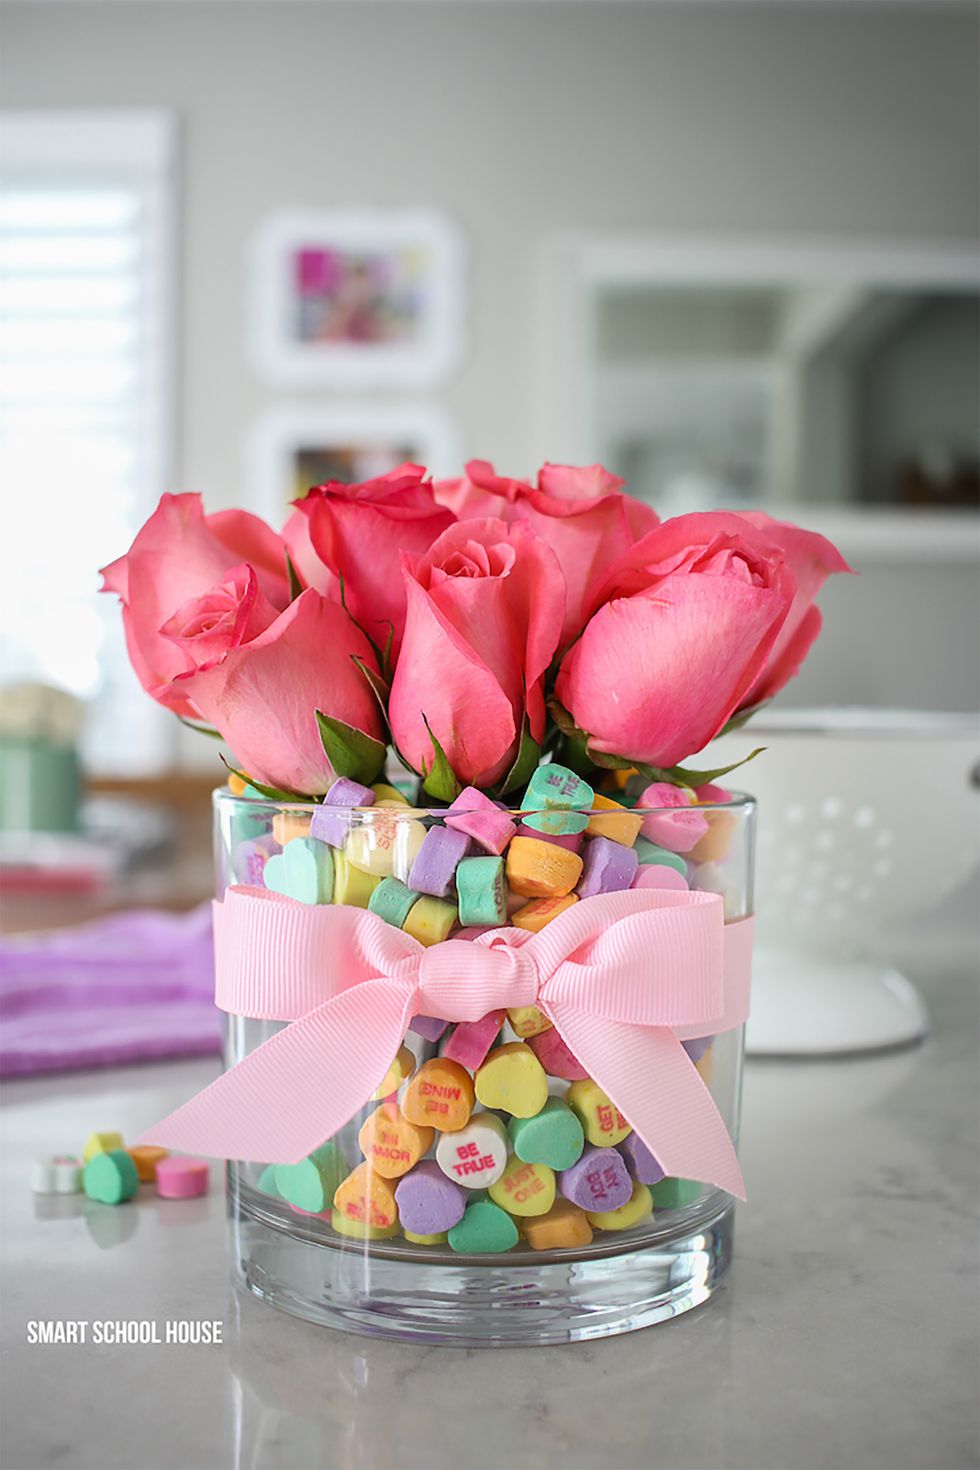 Conversation heart candy filled in vase for flower decor.